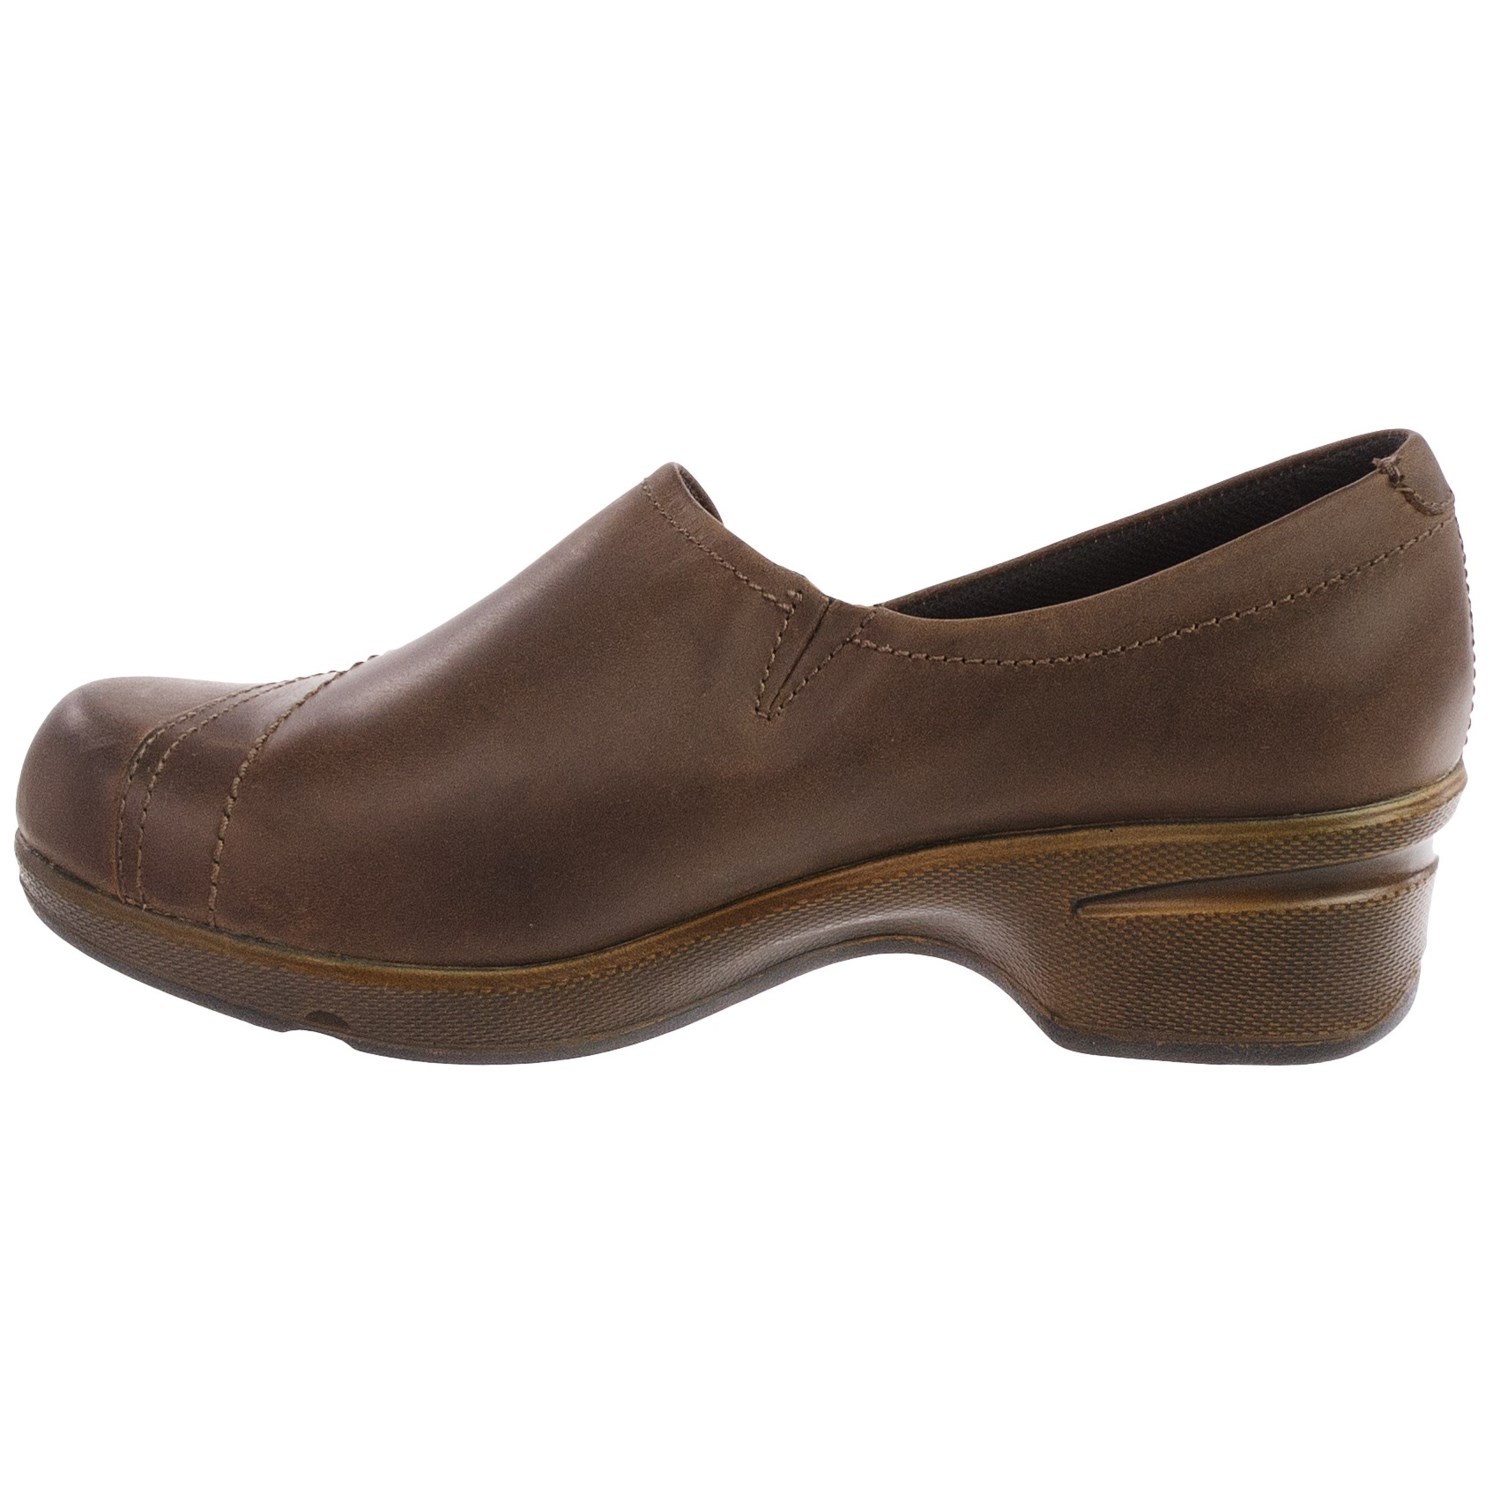 Keen Mora Button Shoes (For Women) - Save 46%